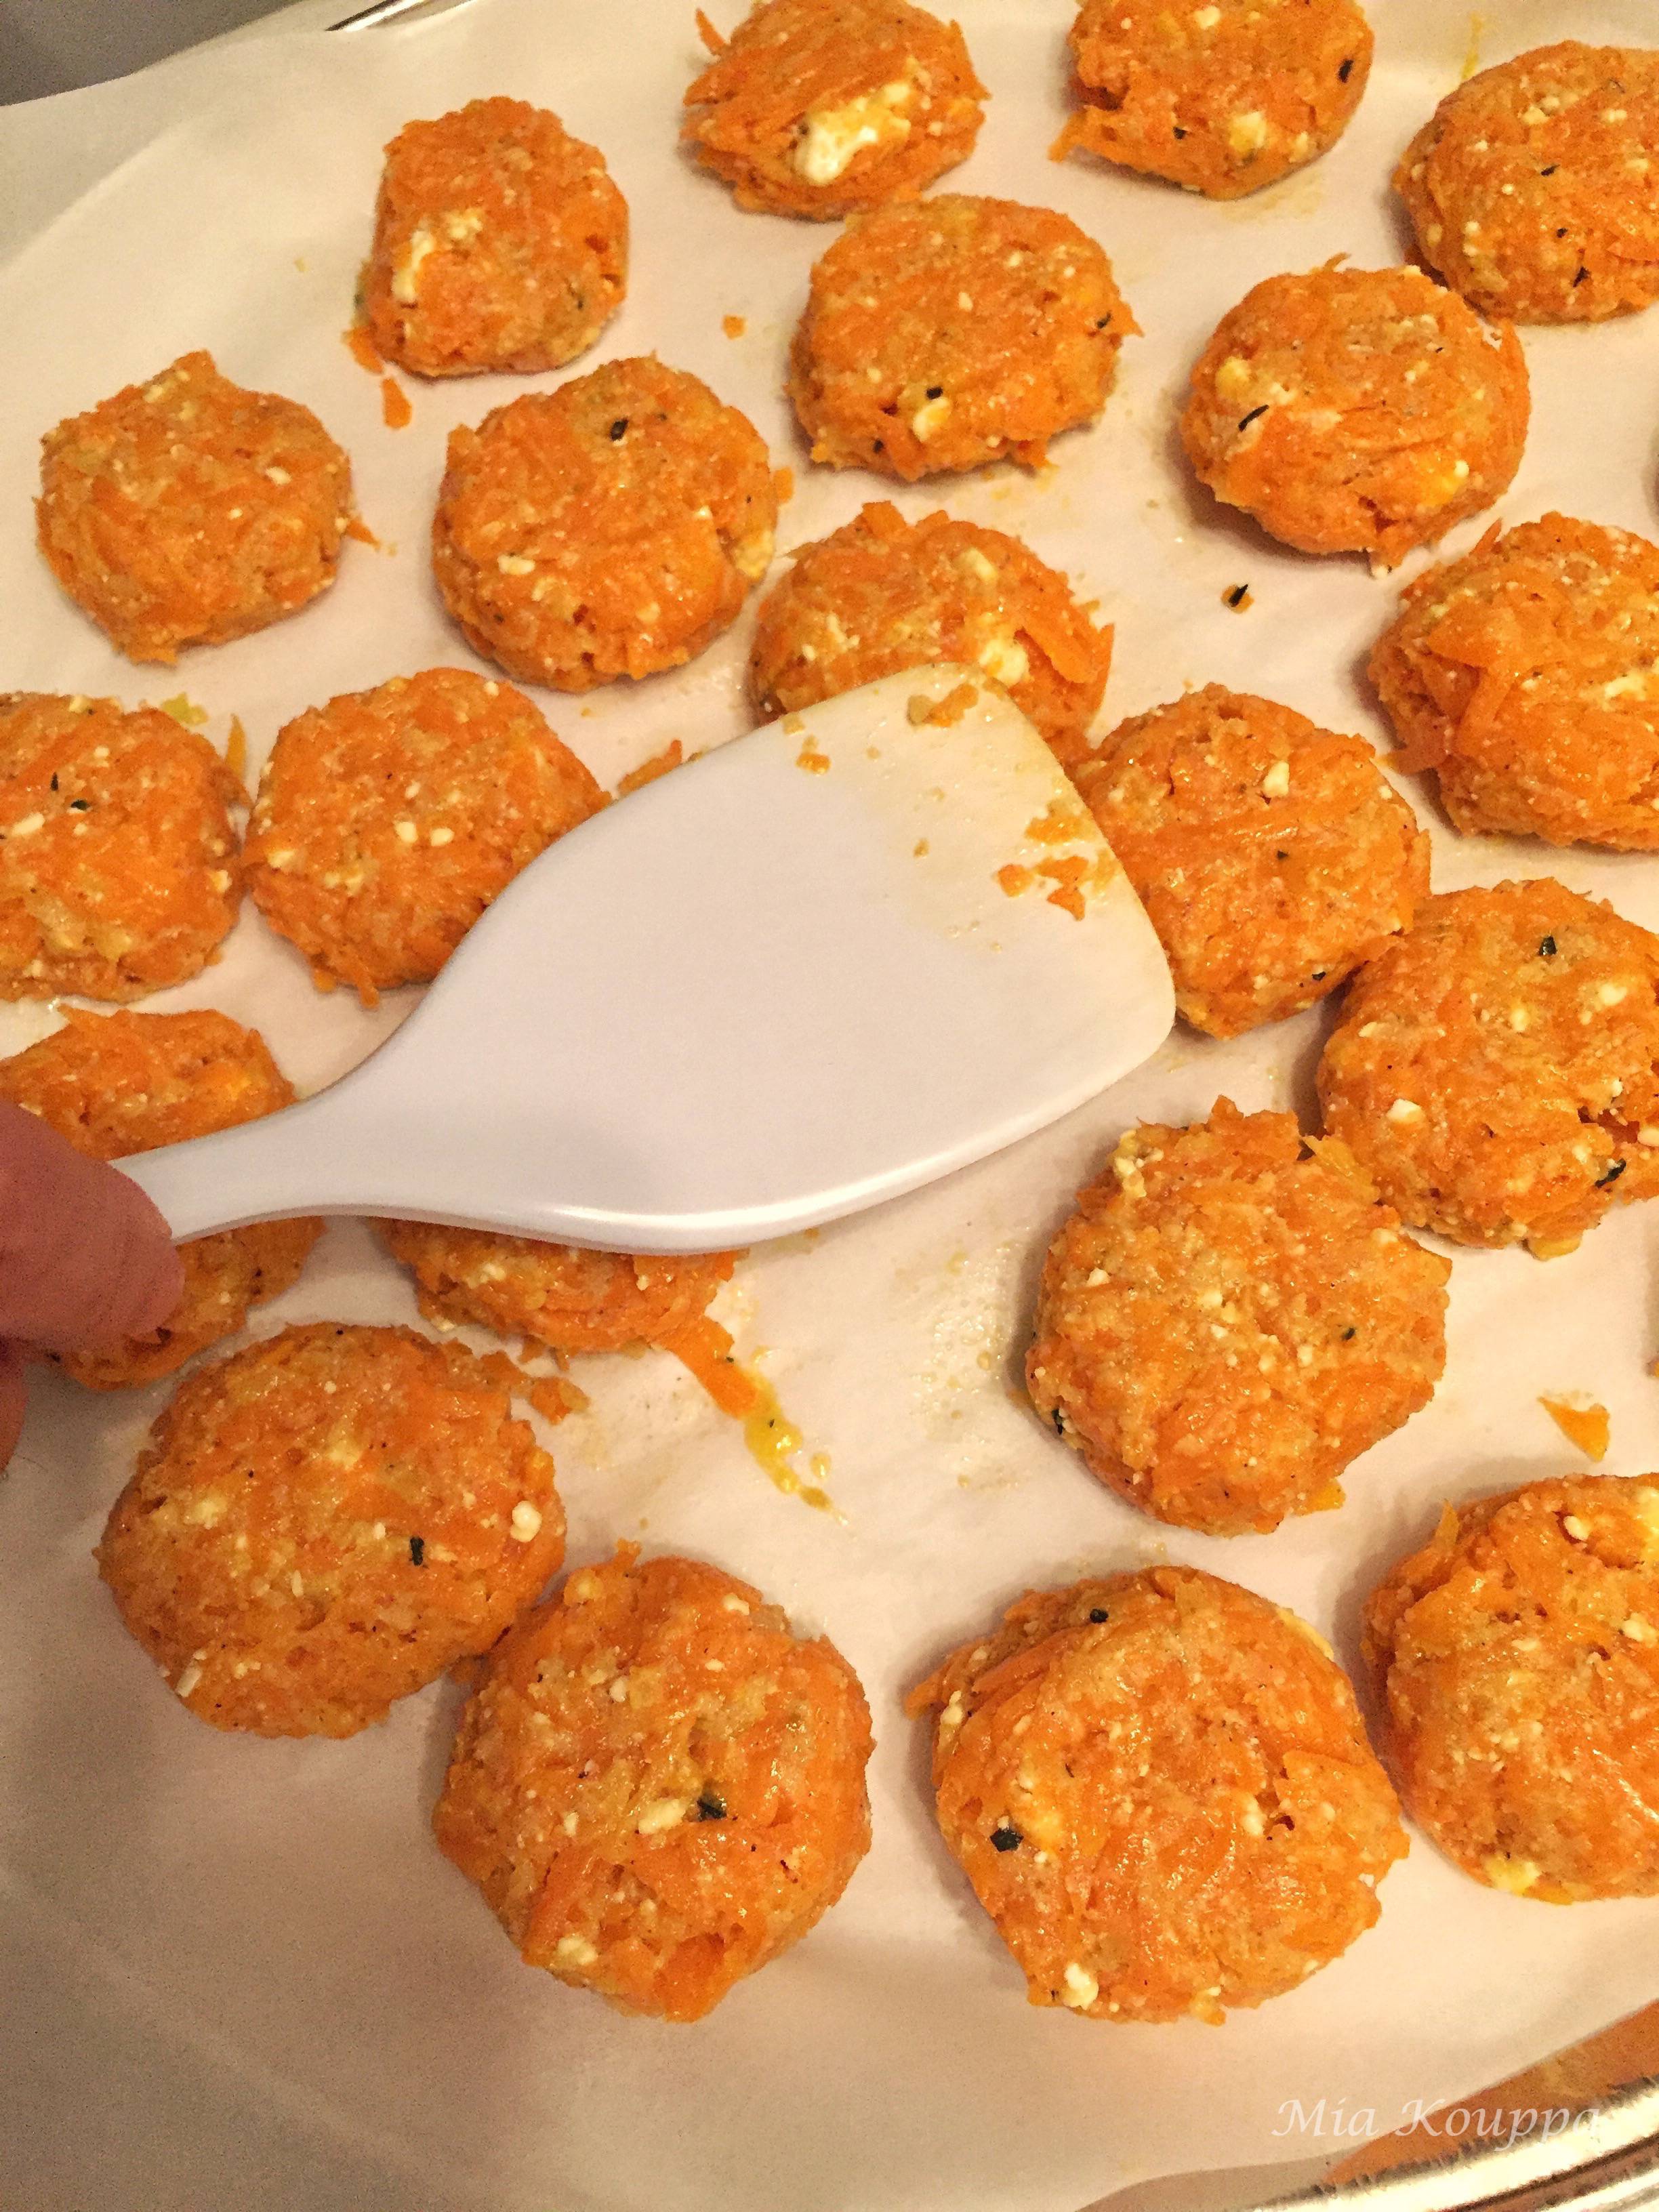 Baked Squash Fritters